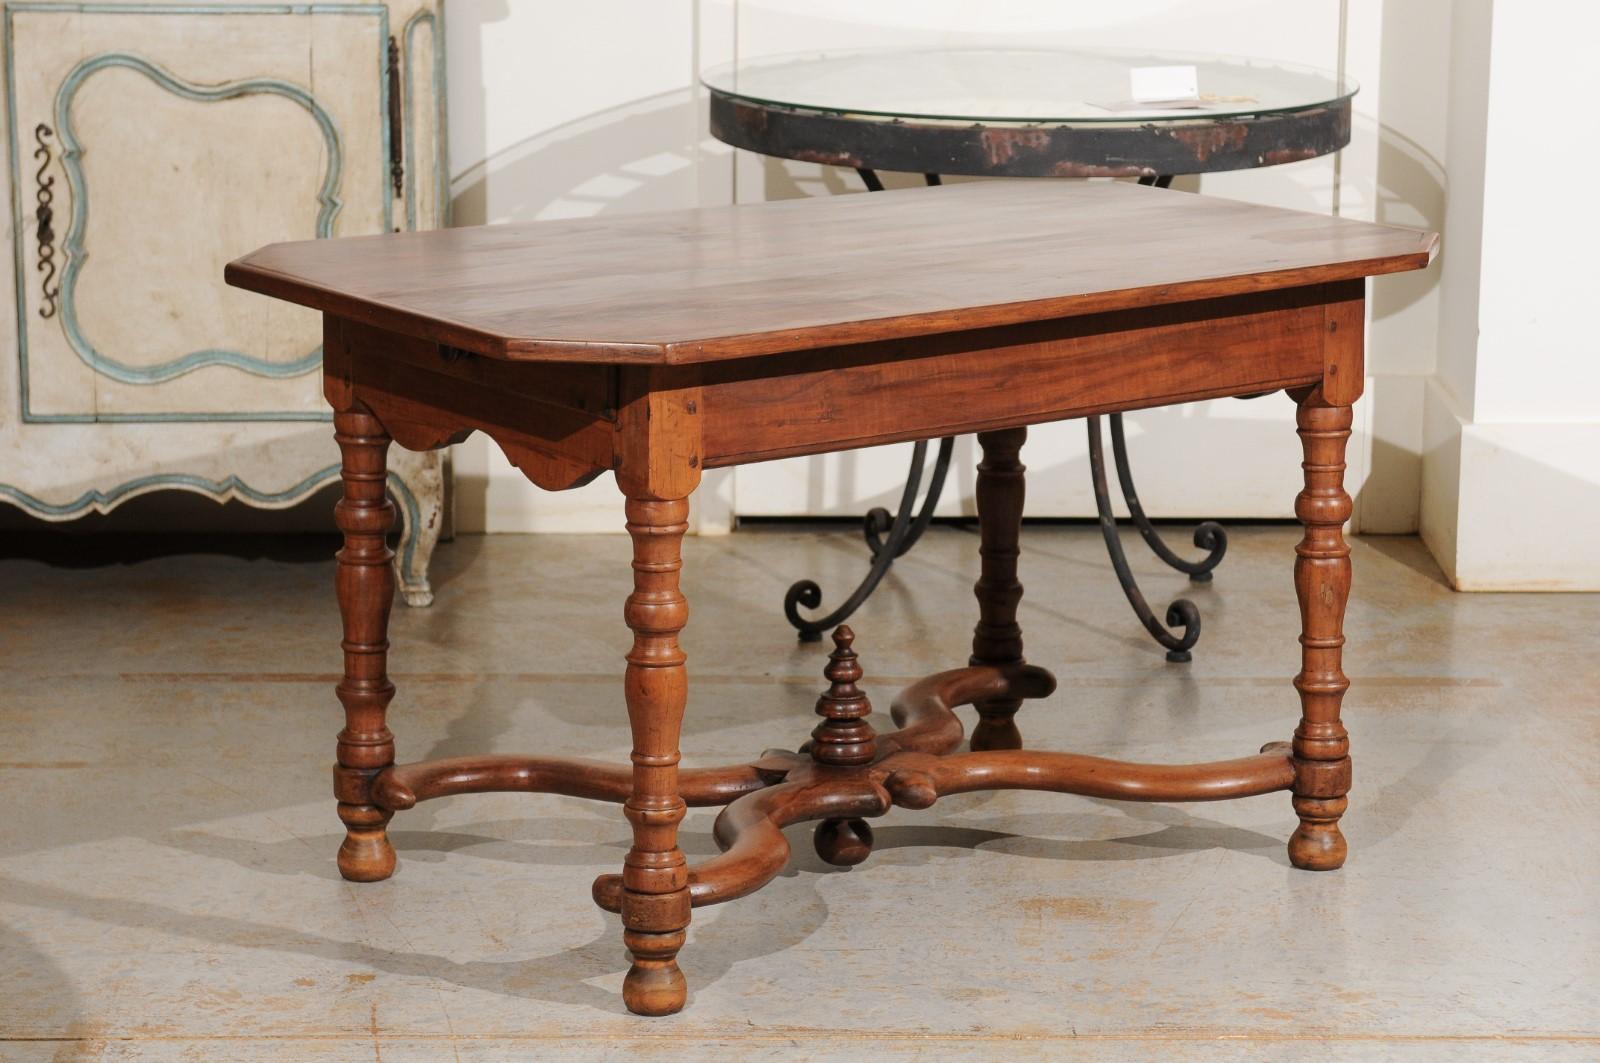 A French walnut side table from the 18th century, with canted corners, lateral drawers, X-form stretcher and carved finial. Born in France during the Age of the Enlightenment, this exquisite walnut side table features a rectangular top with canted